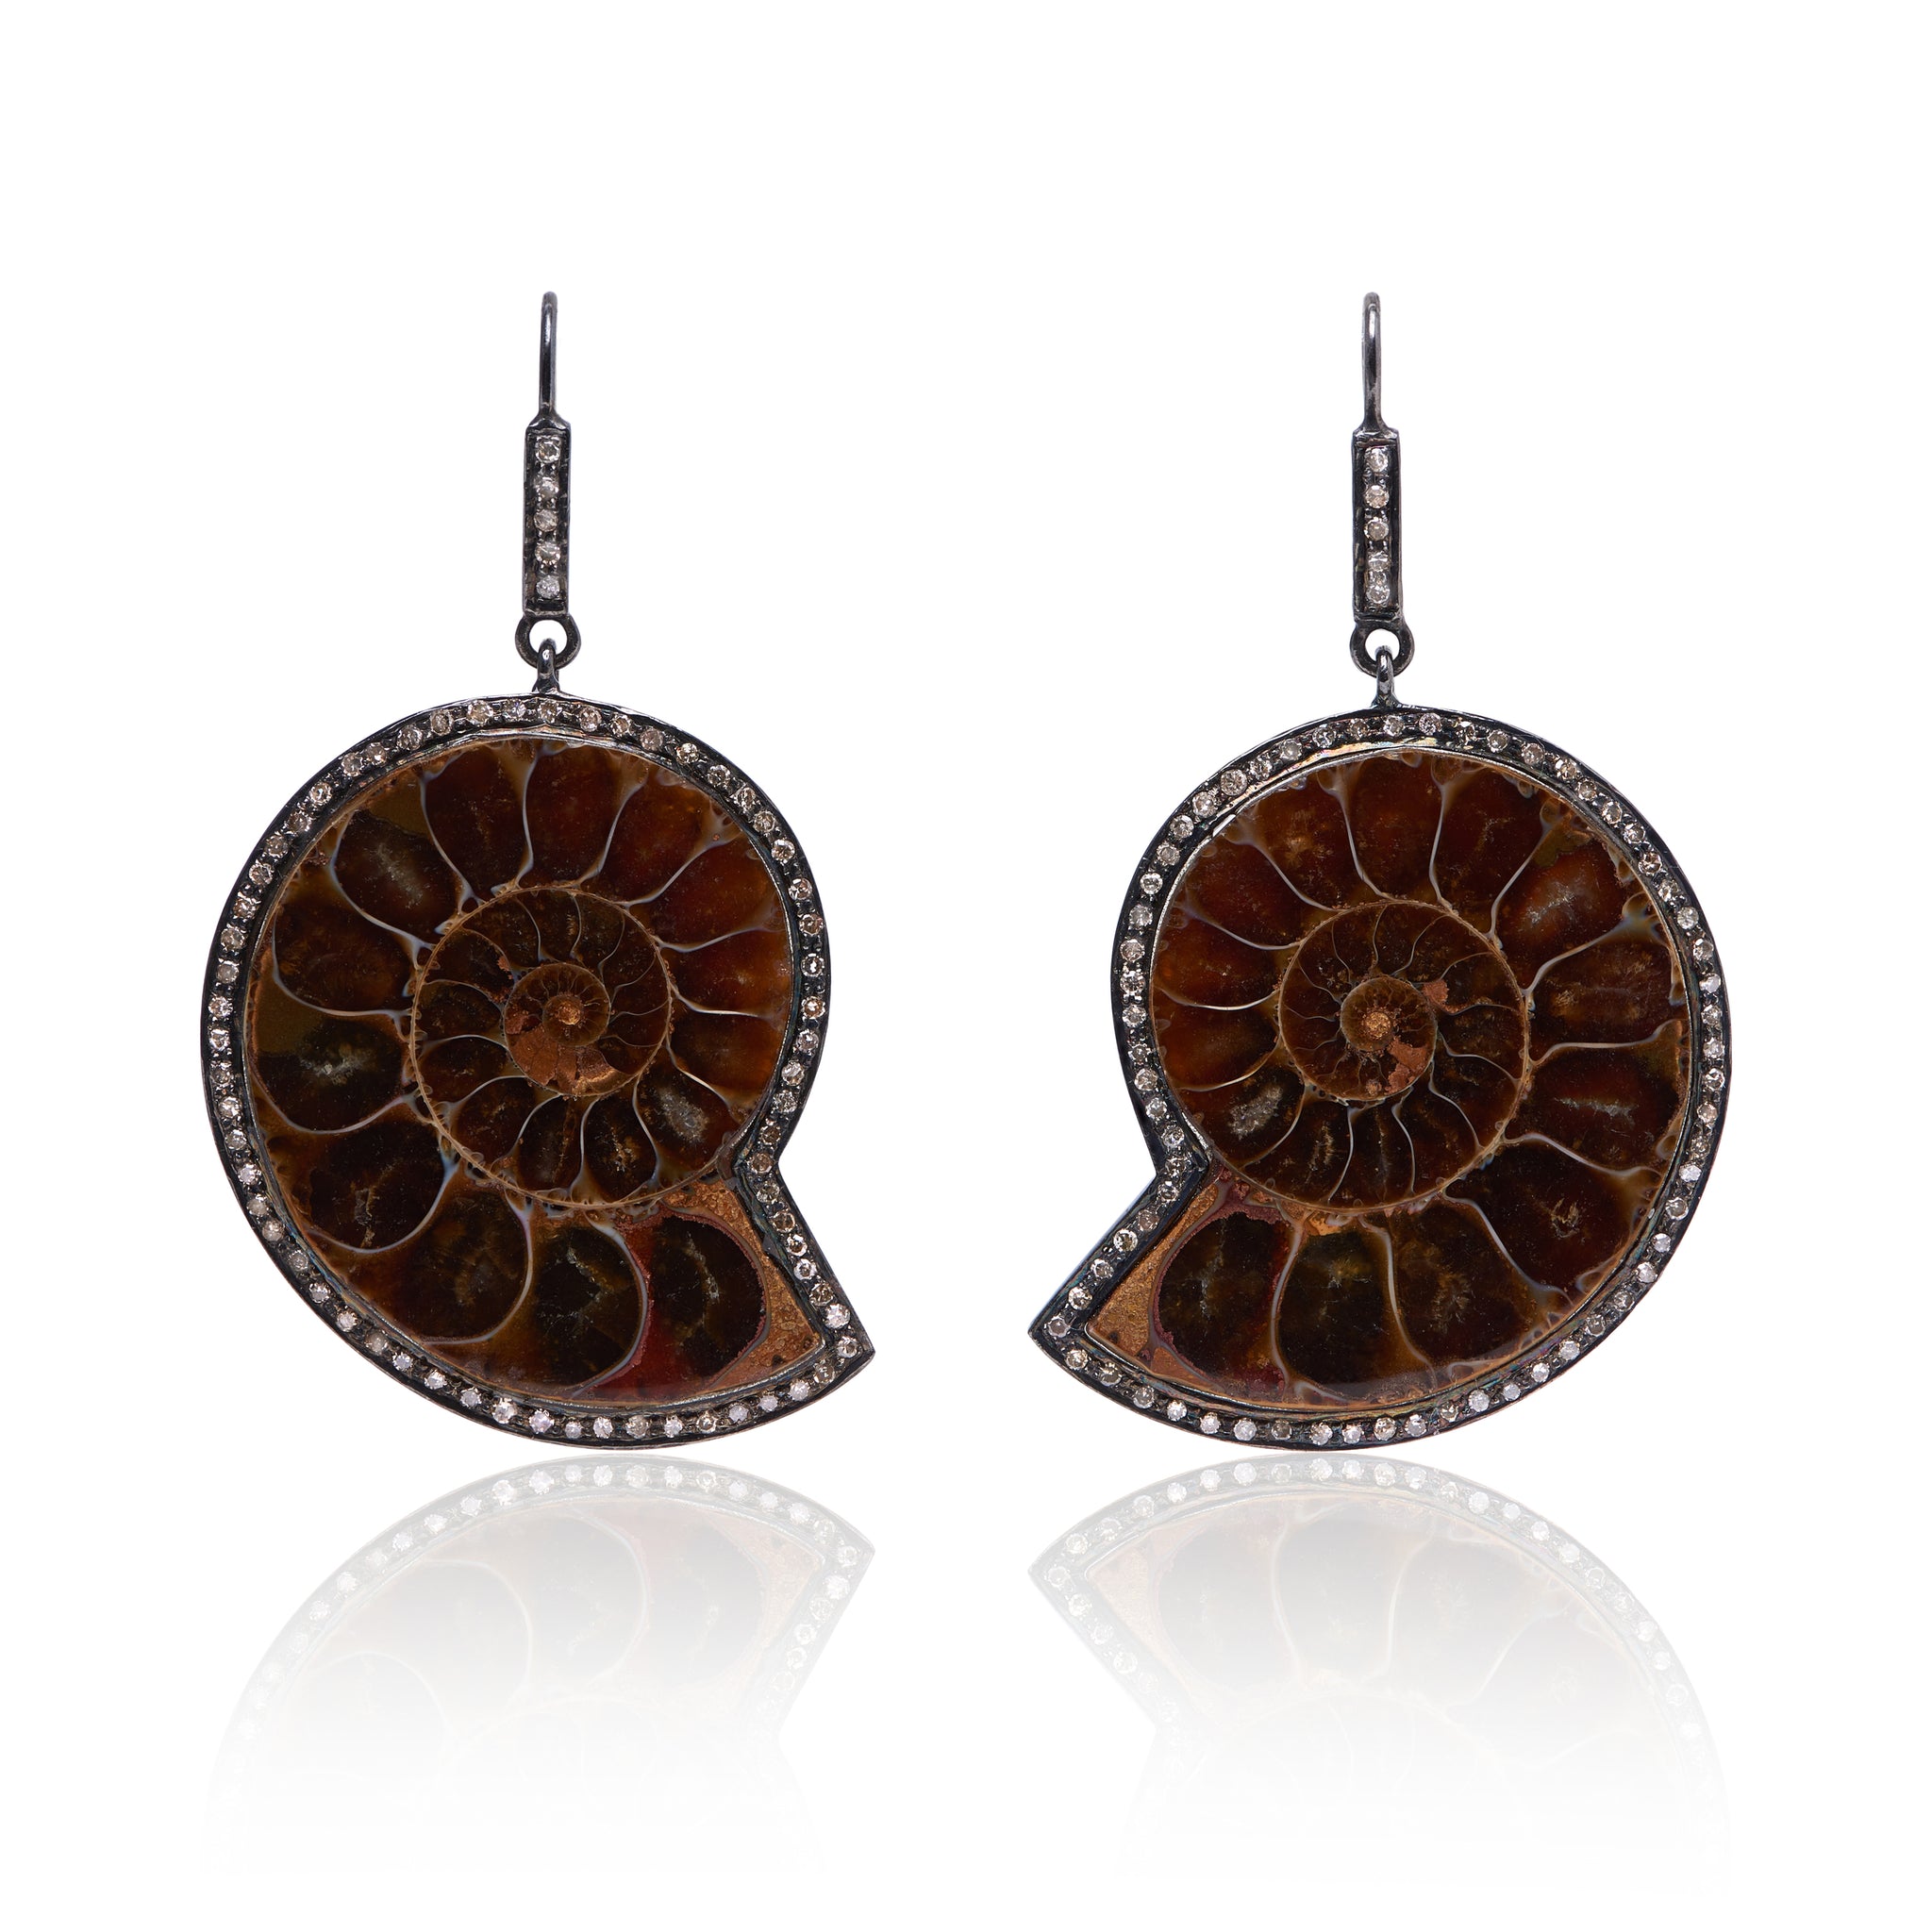 Ammonite Fossil Earrings with Diamonds made in sterling silver